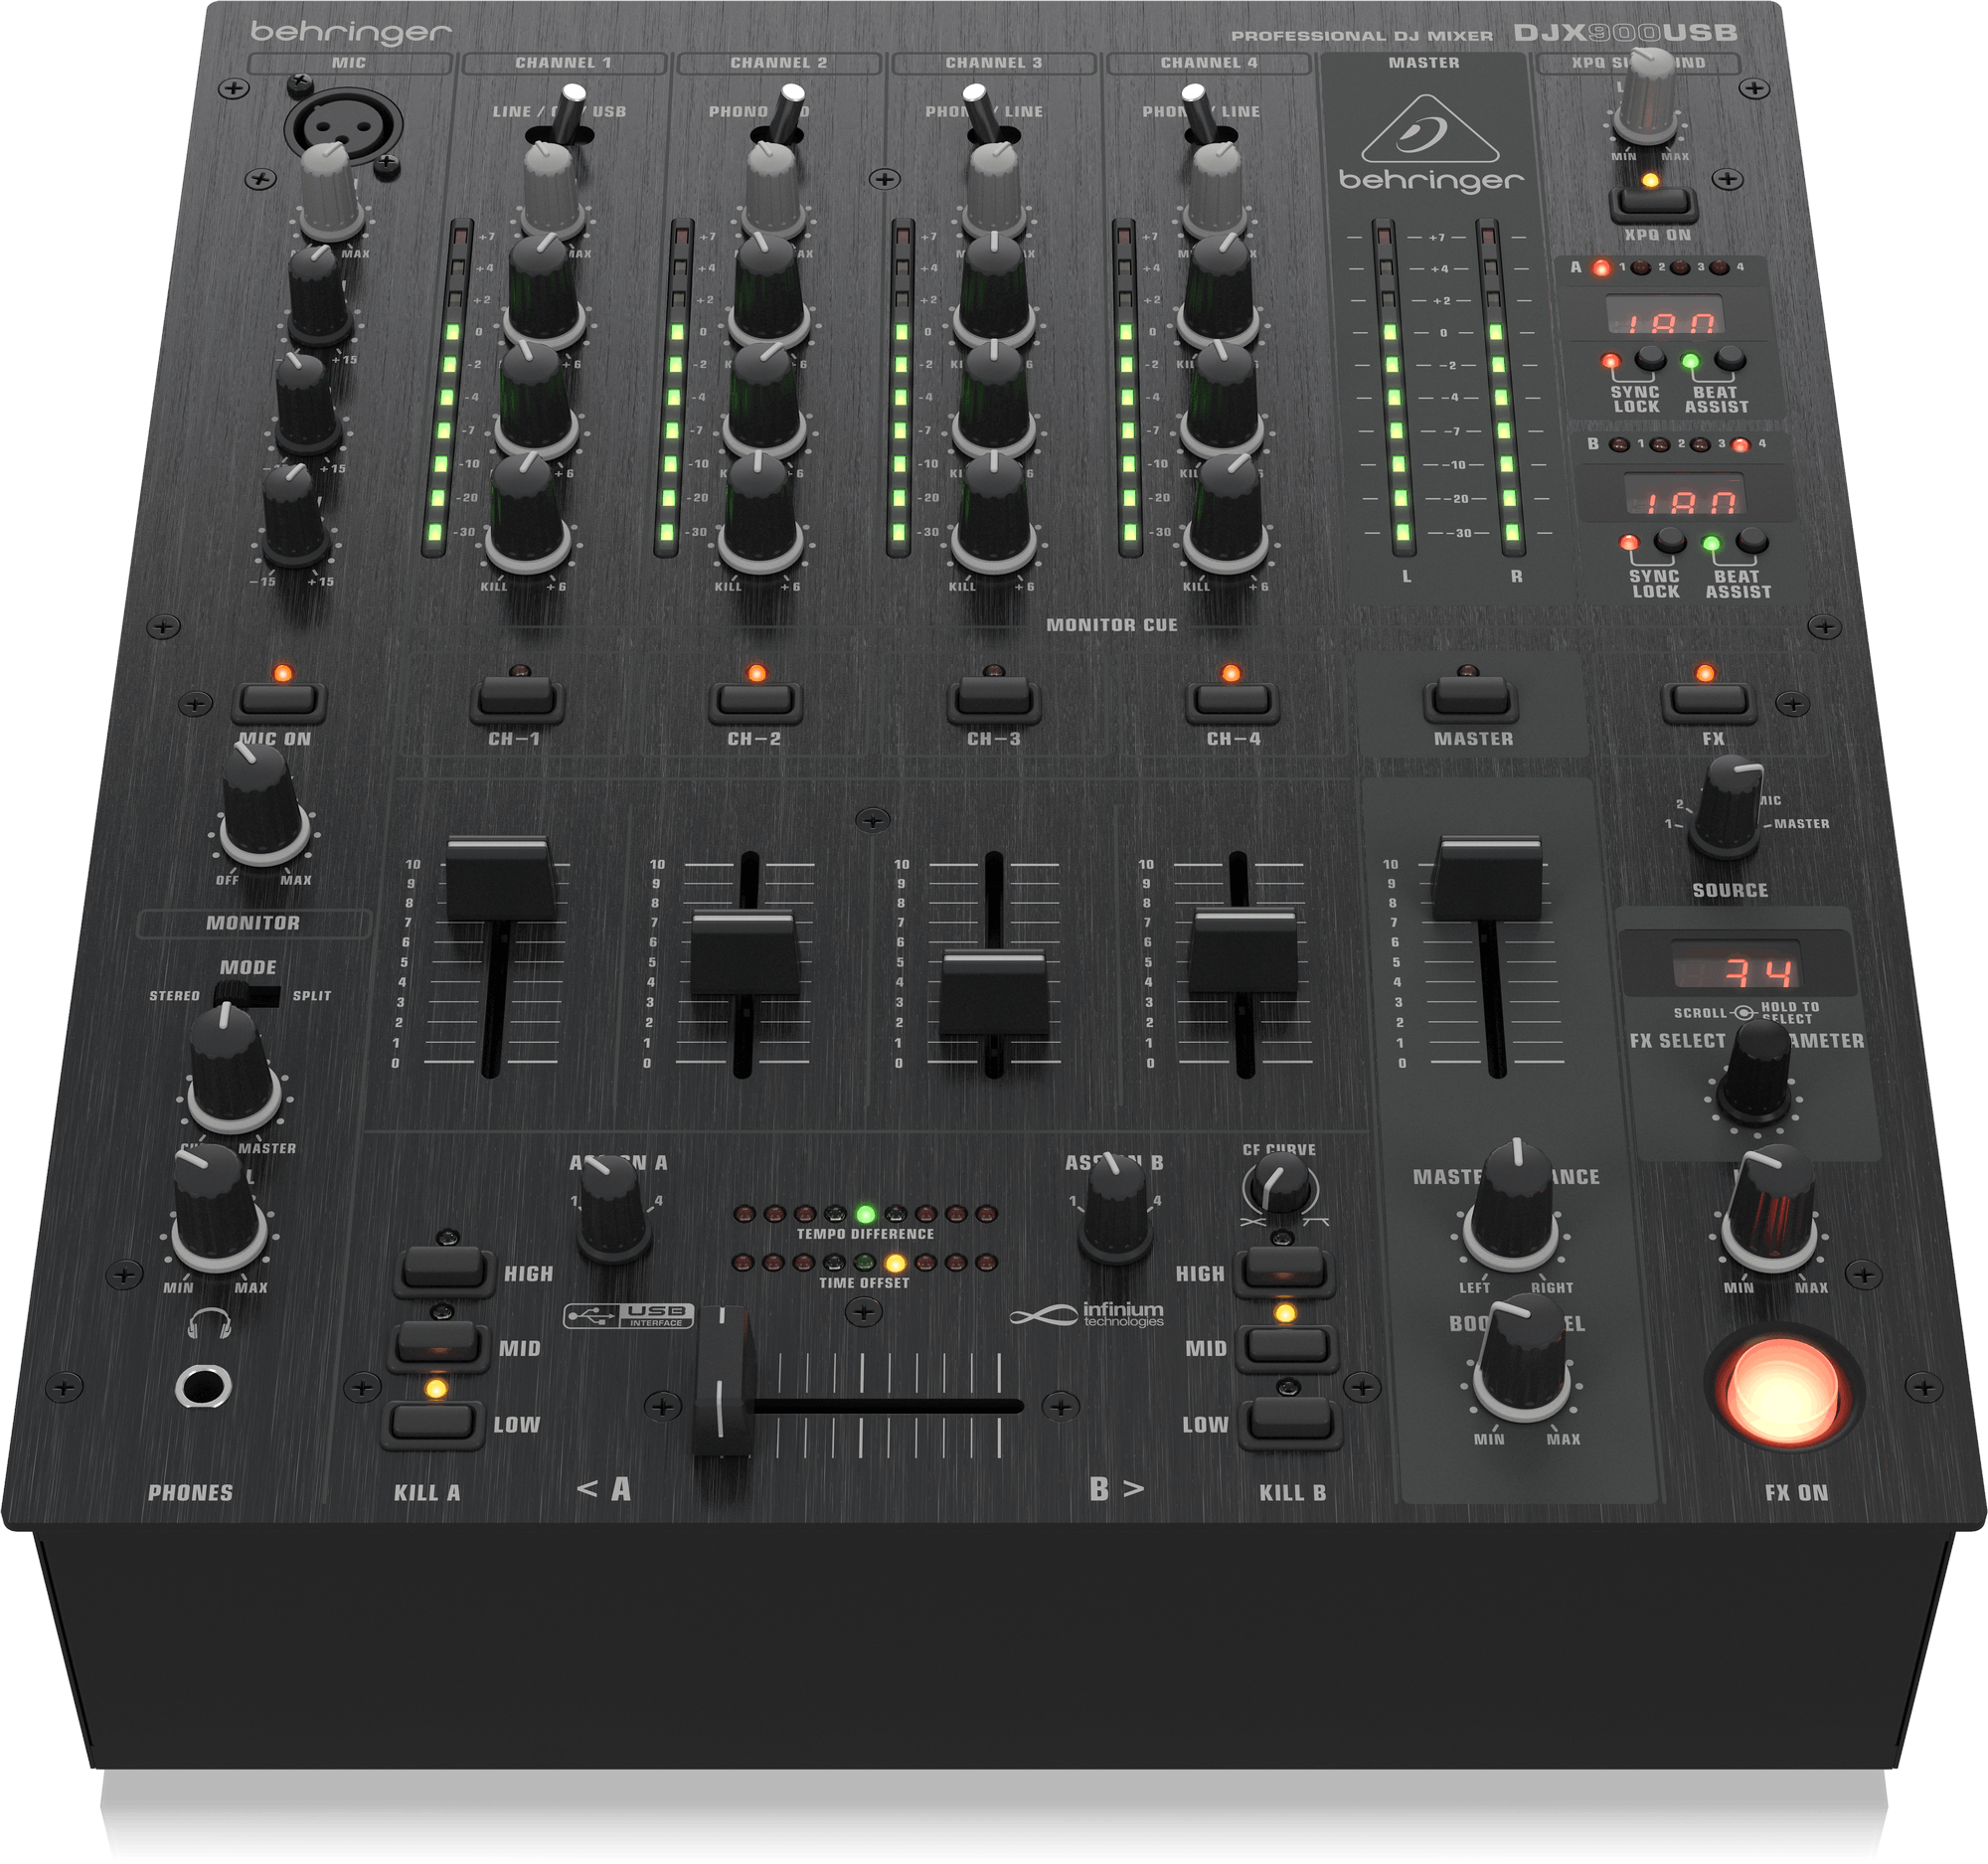 behringer-djx900usb-5-channel-dj-mixer-and-usb-interface-andertons